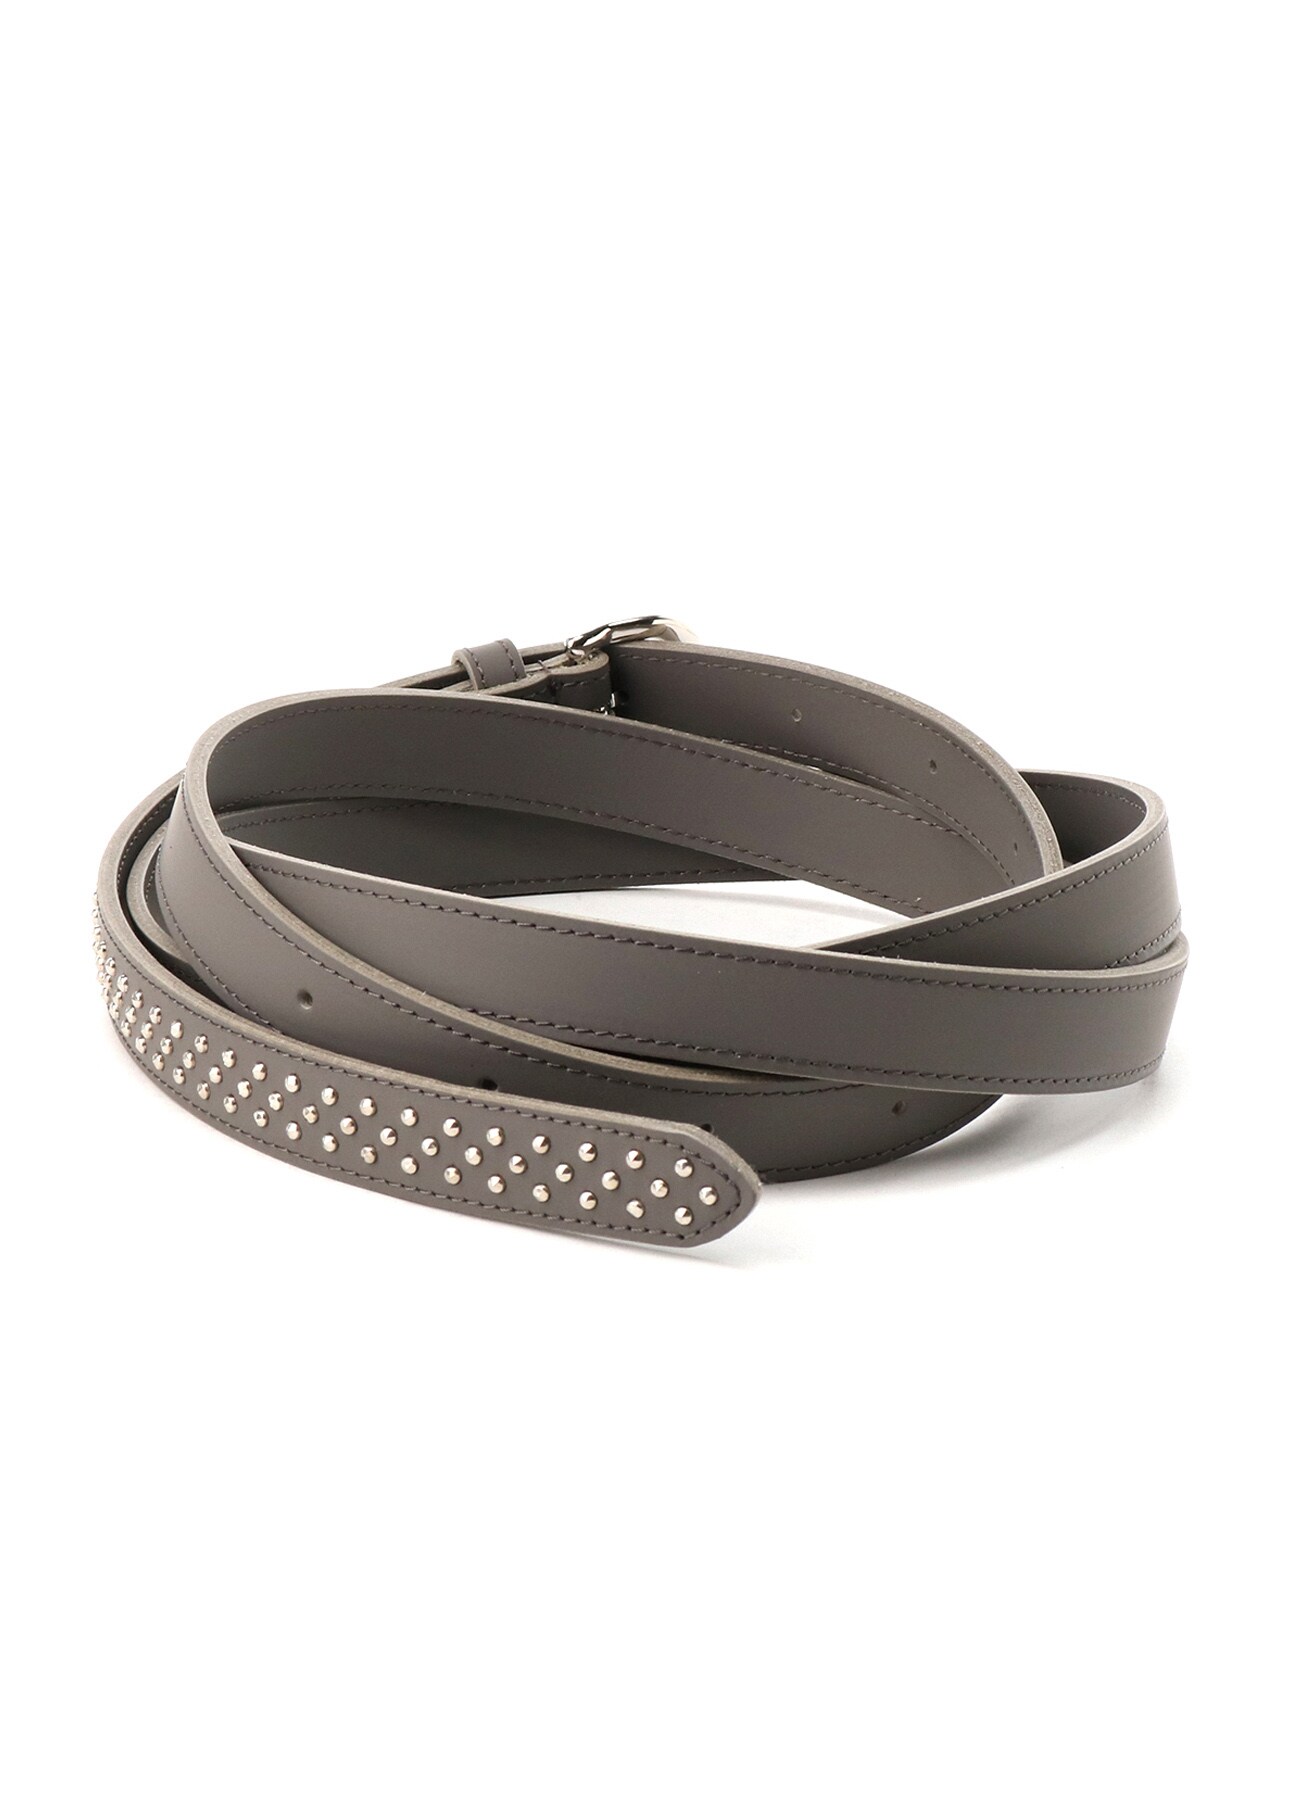 Rubber Touch Leather Double Roll Studs Belt